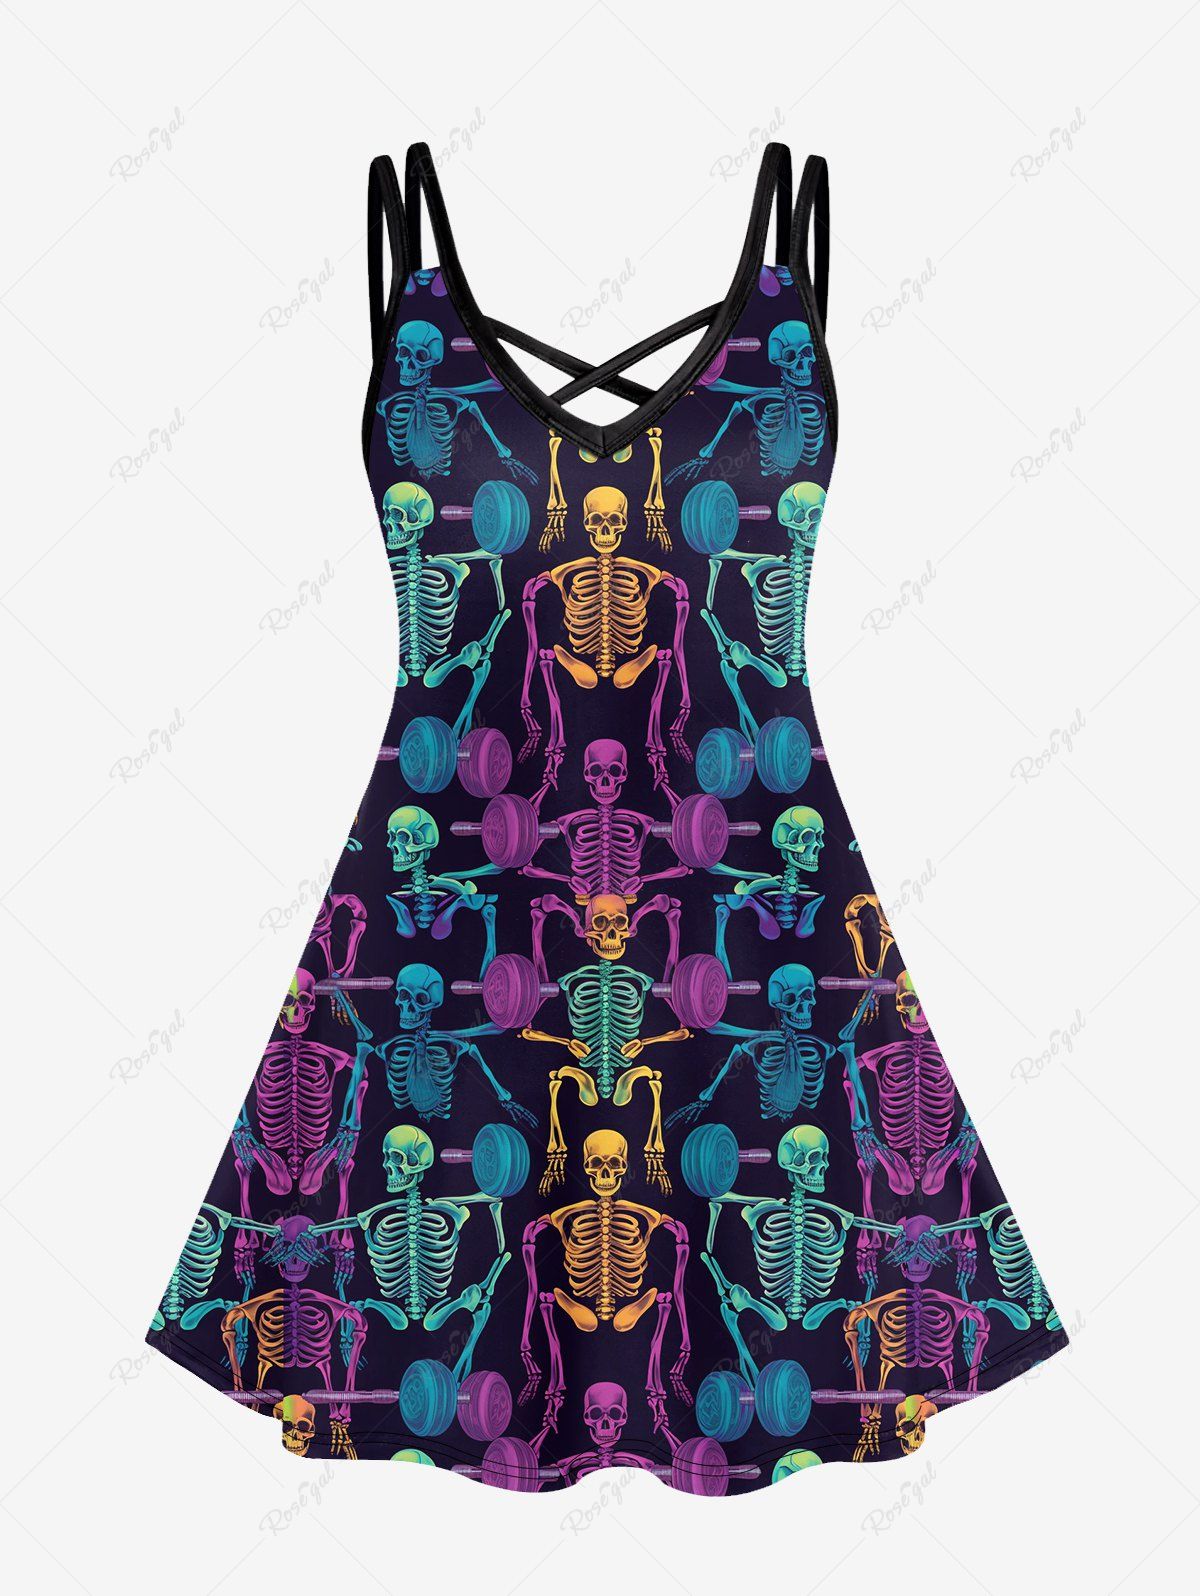 Affordable Gothic Skeleton Colorful Print Crisscross Strappy Cami Dress  